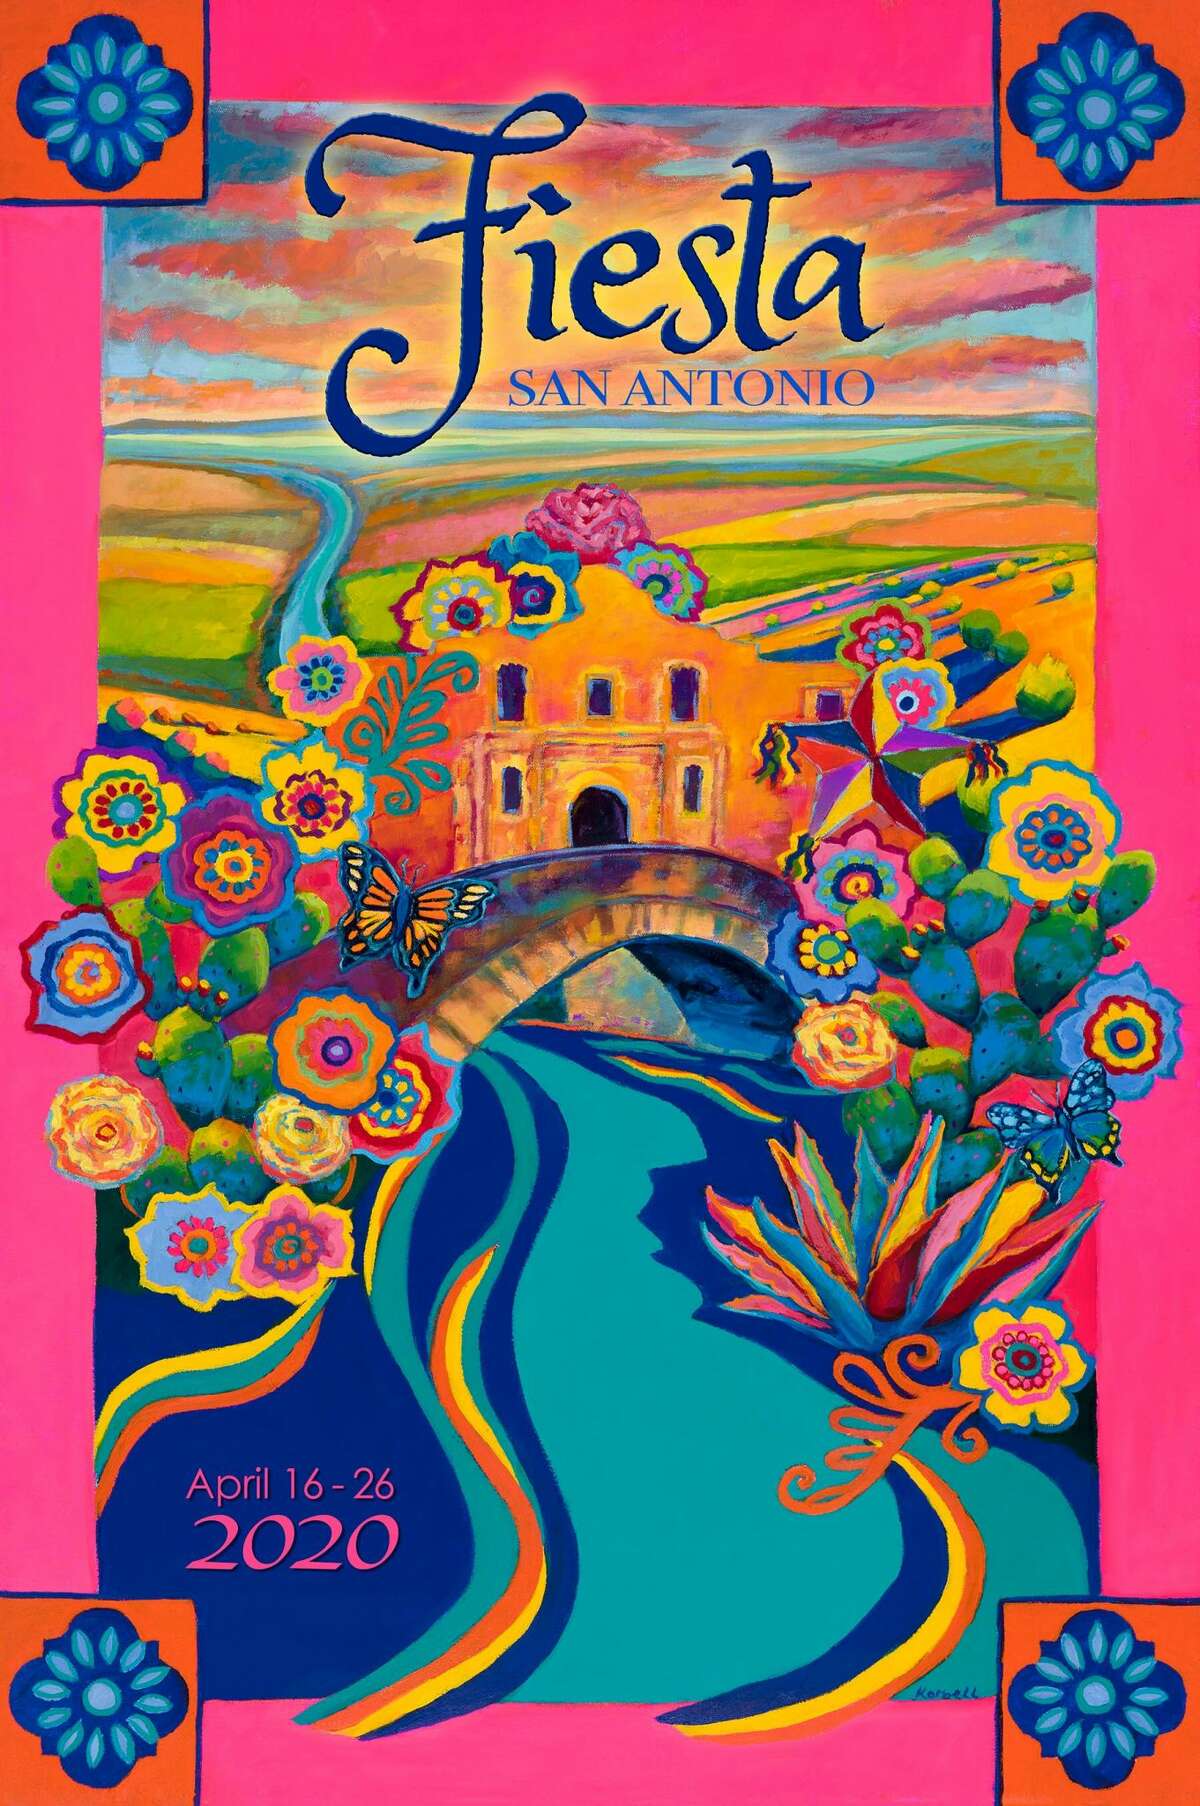 2020 Fiesta posterThe 2020 Fiesta poster by Caroline Carrington depicts the Alamo and Riverwalk with a Texas Hill Country-like landscape encased by talavera tiles and colorful flowers. Read more here. 